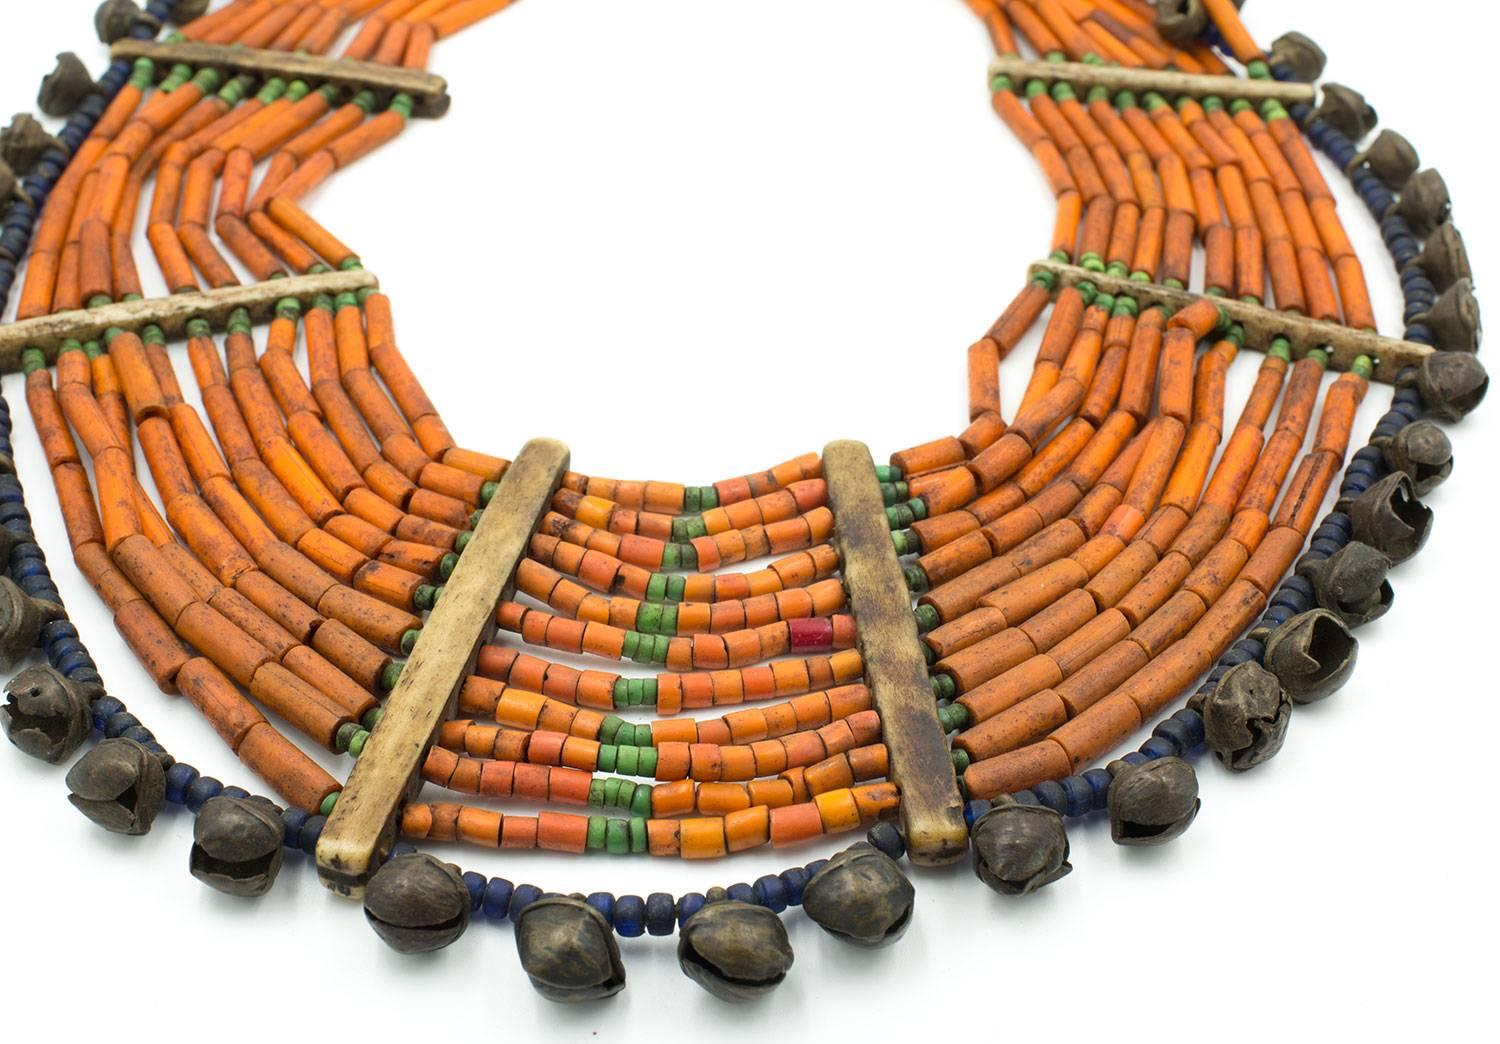 A very old woman's necklace from Nagaland. Real Naga pieces are rare- this is one of them. Made with fantastic old bronze bells, orange glass beads, old cobalt beads, turquoise beads and bone spacers. Finished off with an old coins it's clasp.
The